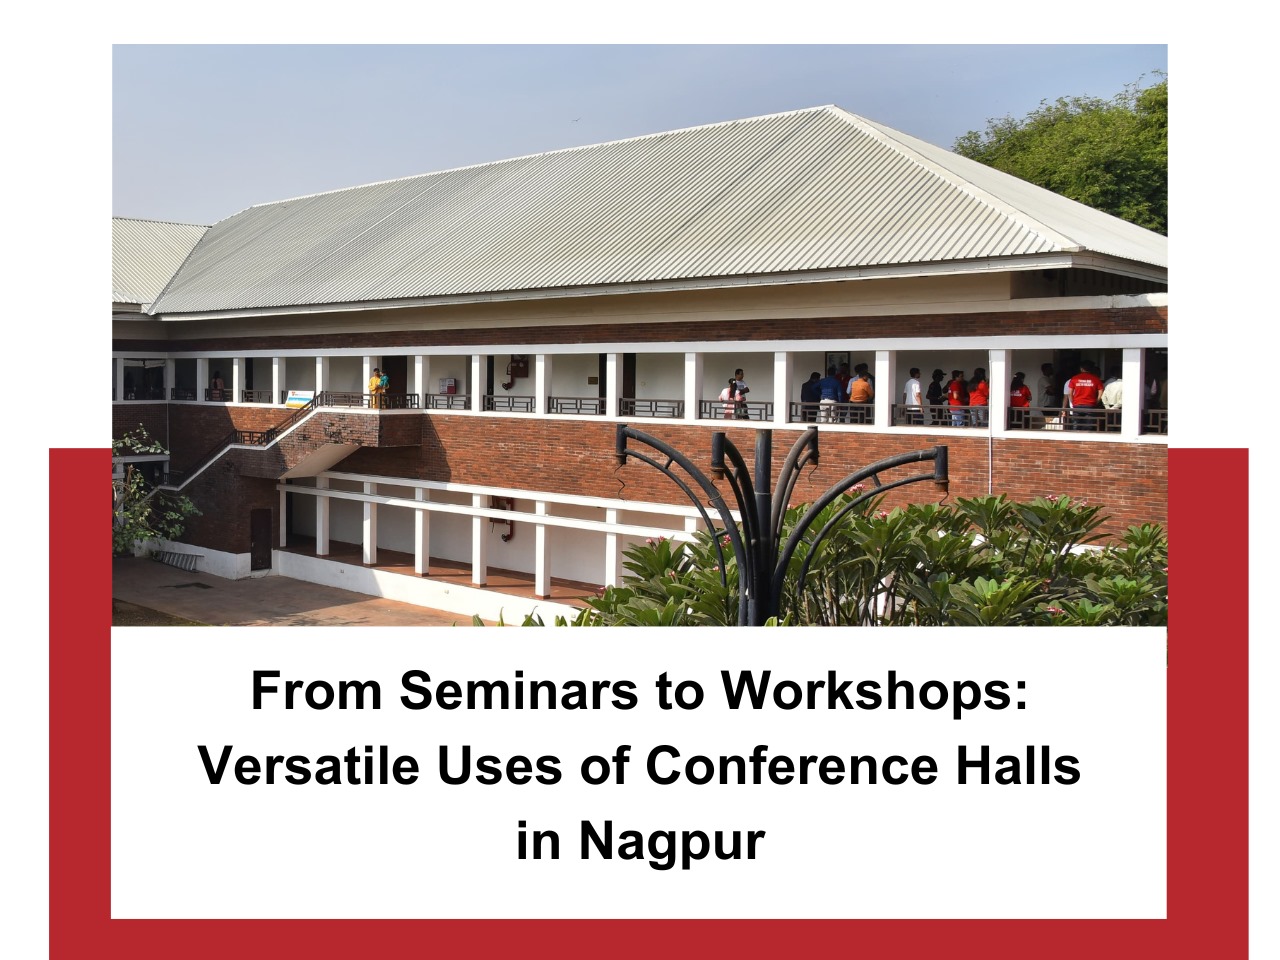 Conference hall in nsagpur